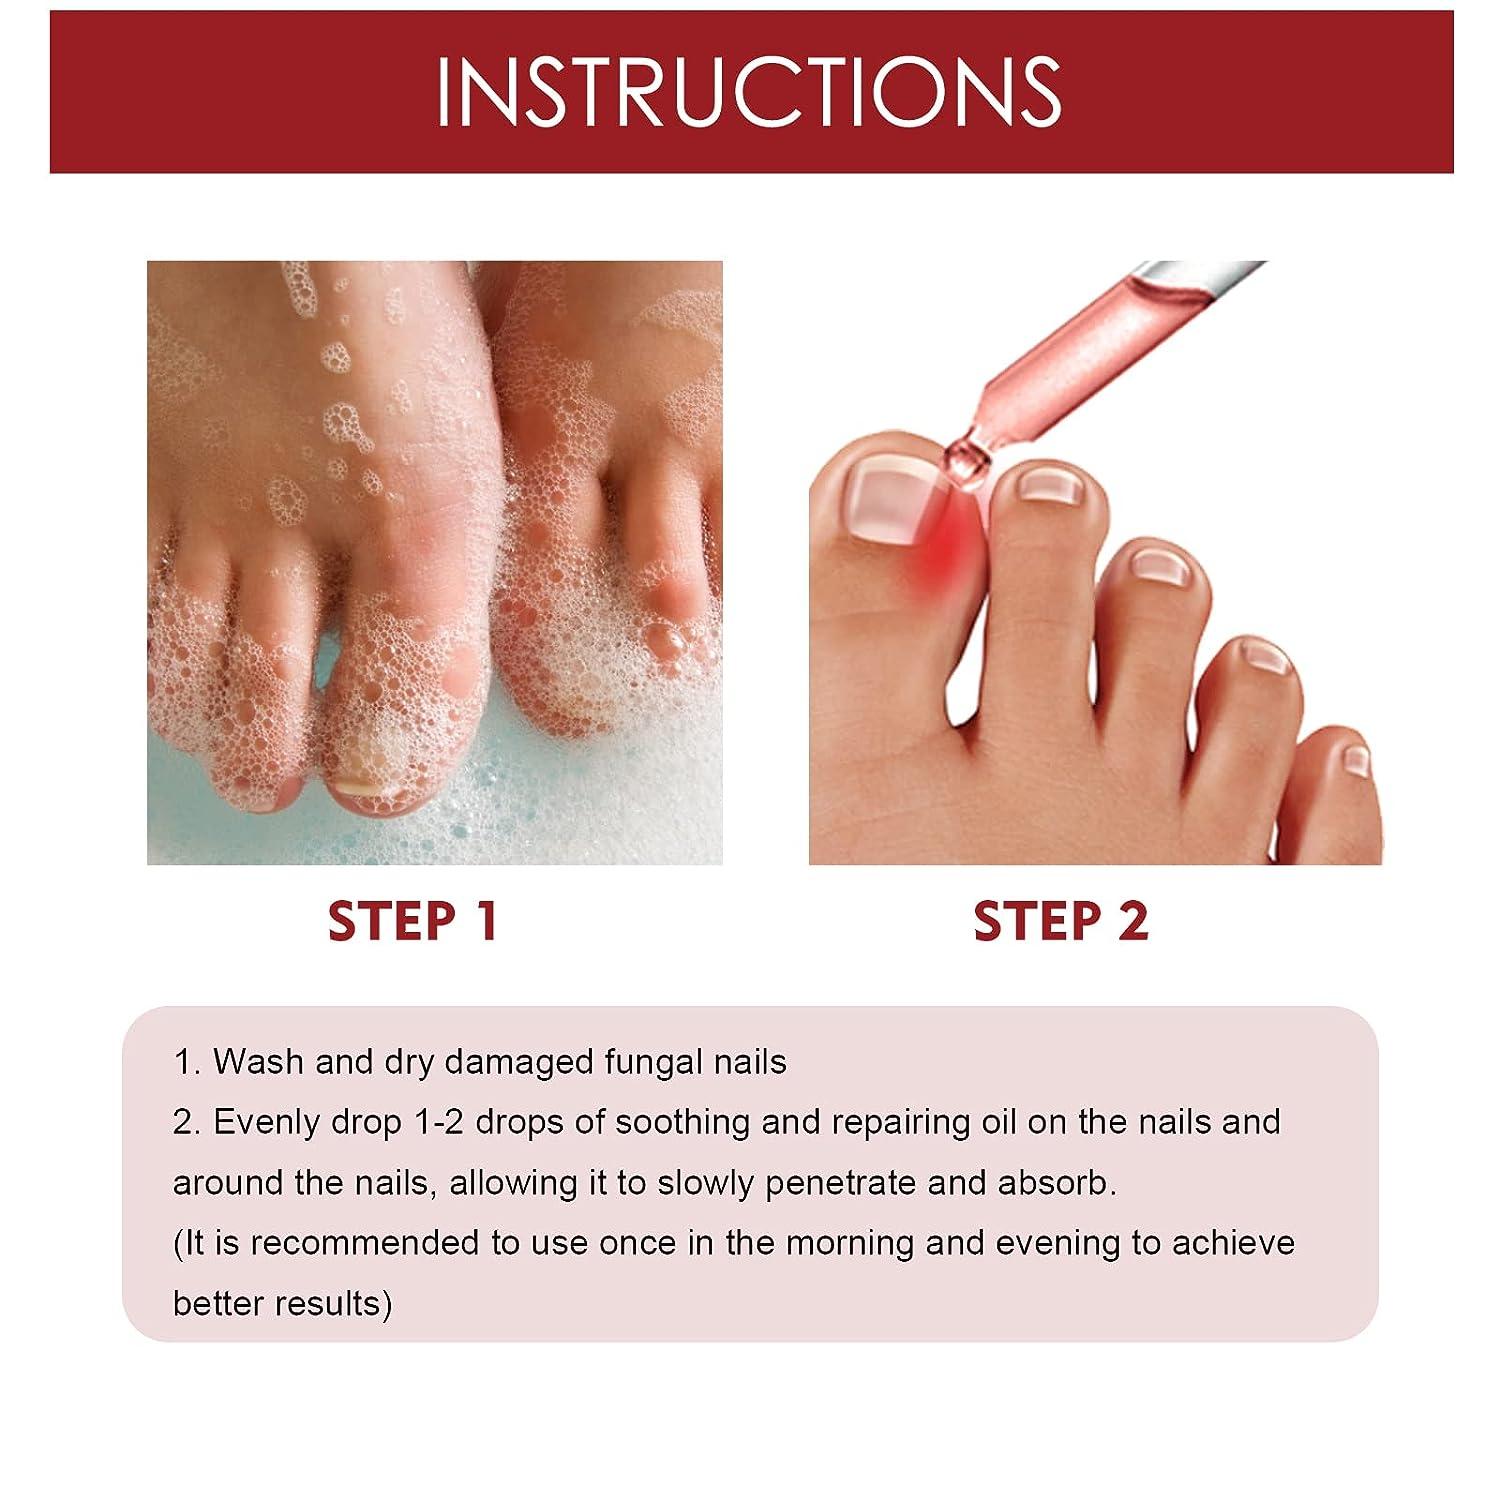 Most Common Toenail Problems | The Podiatry Group of South Texas